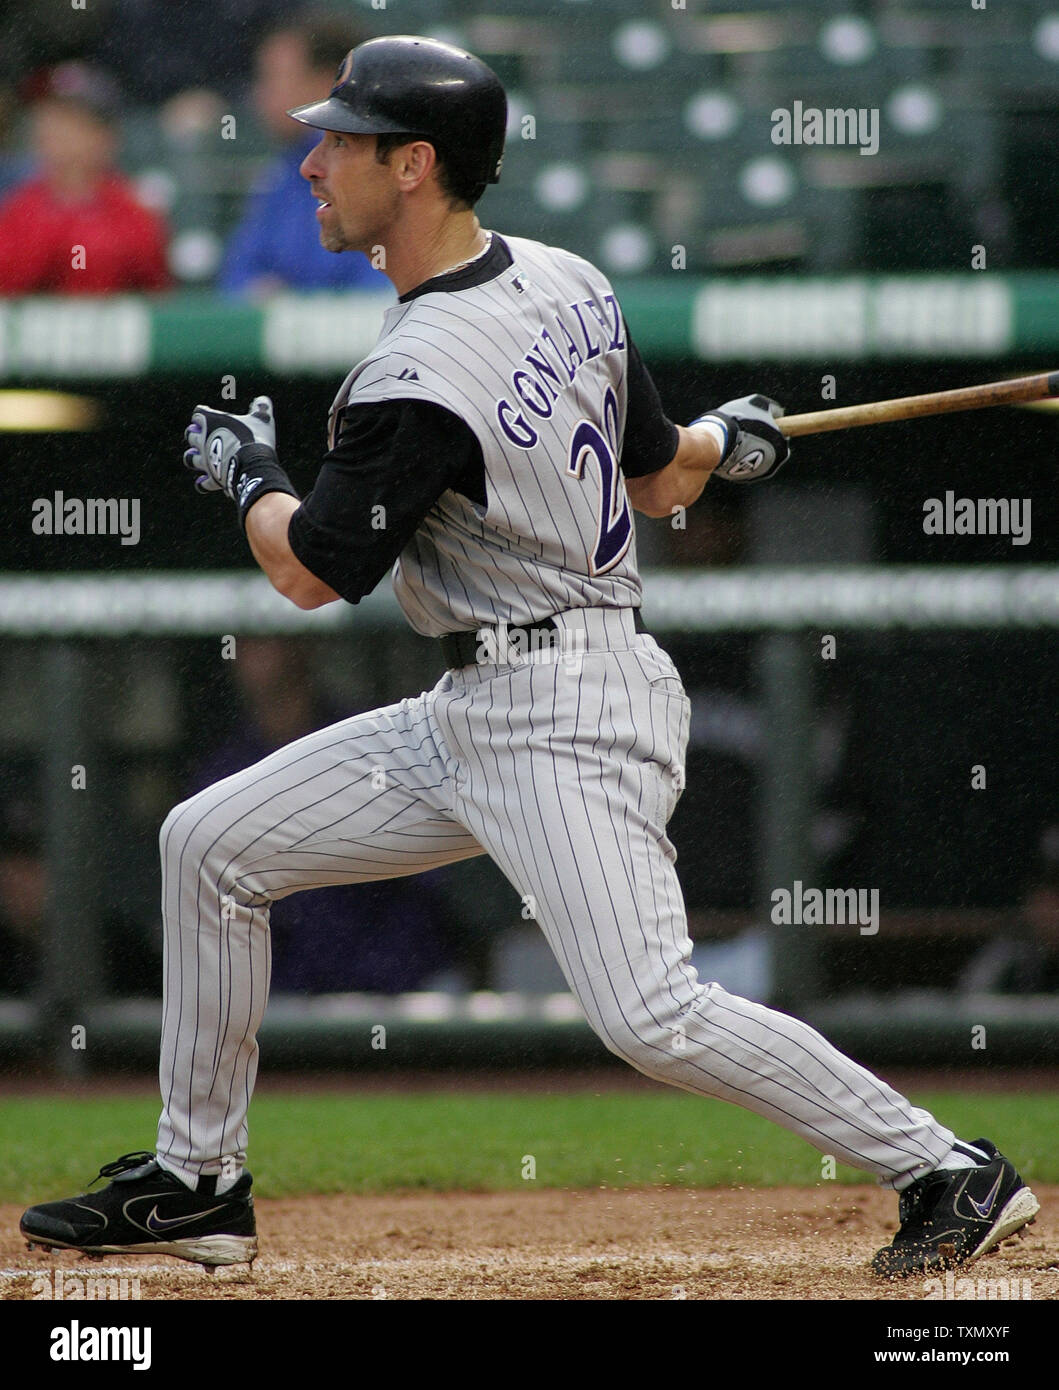 Arizona Diamondbacks batter Luis Gonzalez watches his solo homerun against  the Colorado Rockies in the second innng at Coors Field in Denver July 9,  2006. Arizona beat Colorado 8-5 sweeping the three-game